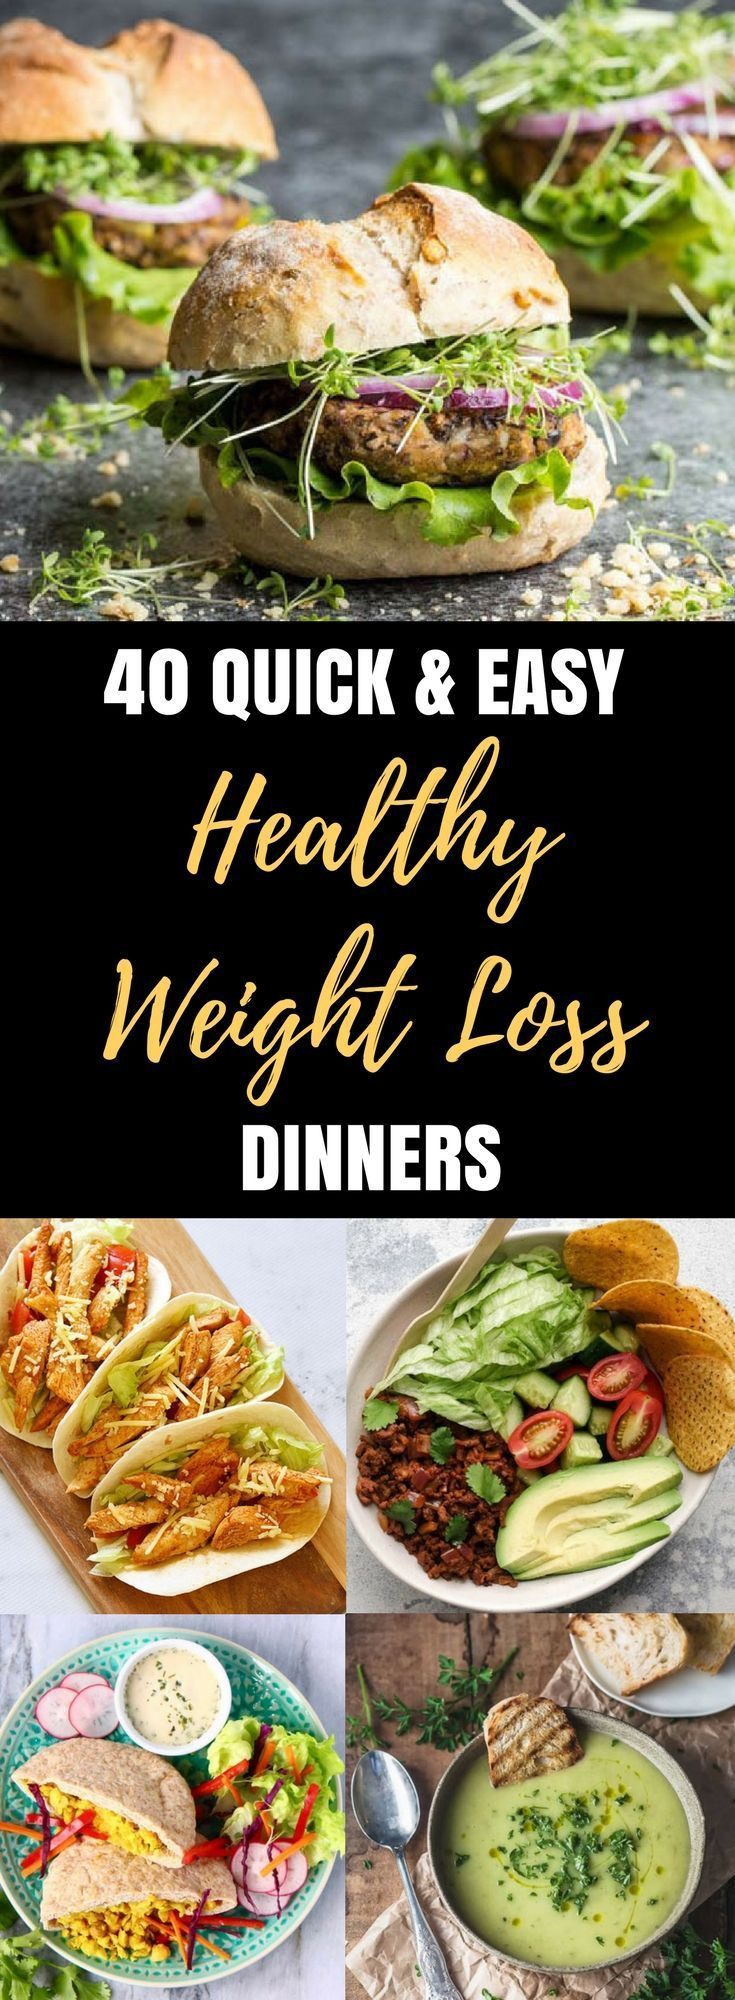 Light Dinner Recipes For Weight Loss
 25 Quick and Easy Healthy Dinner Recipes